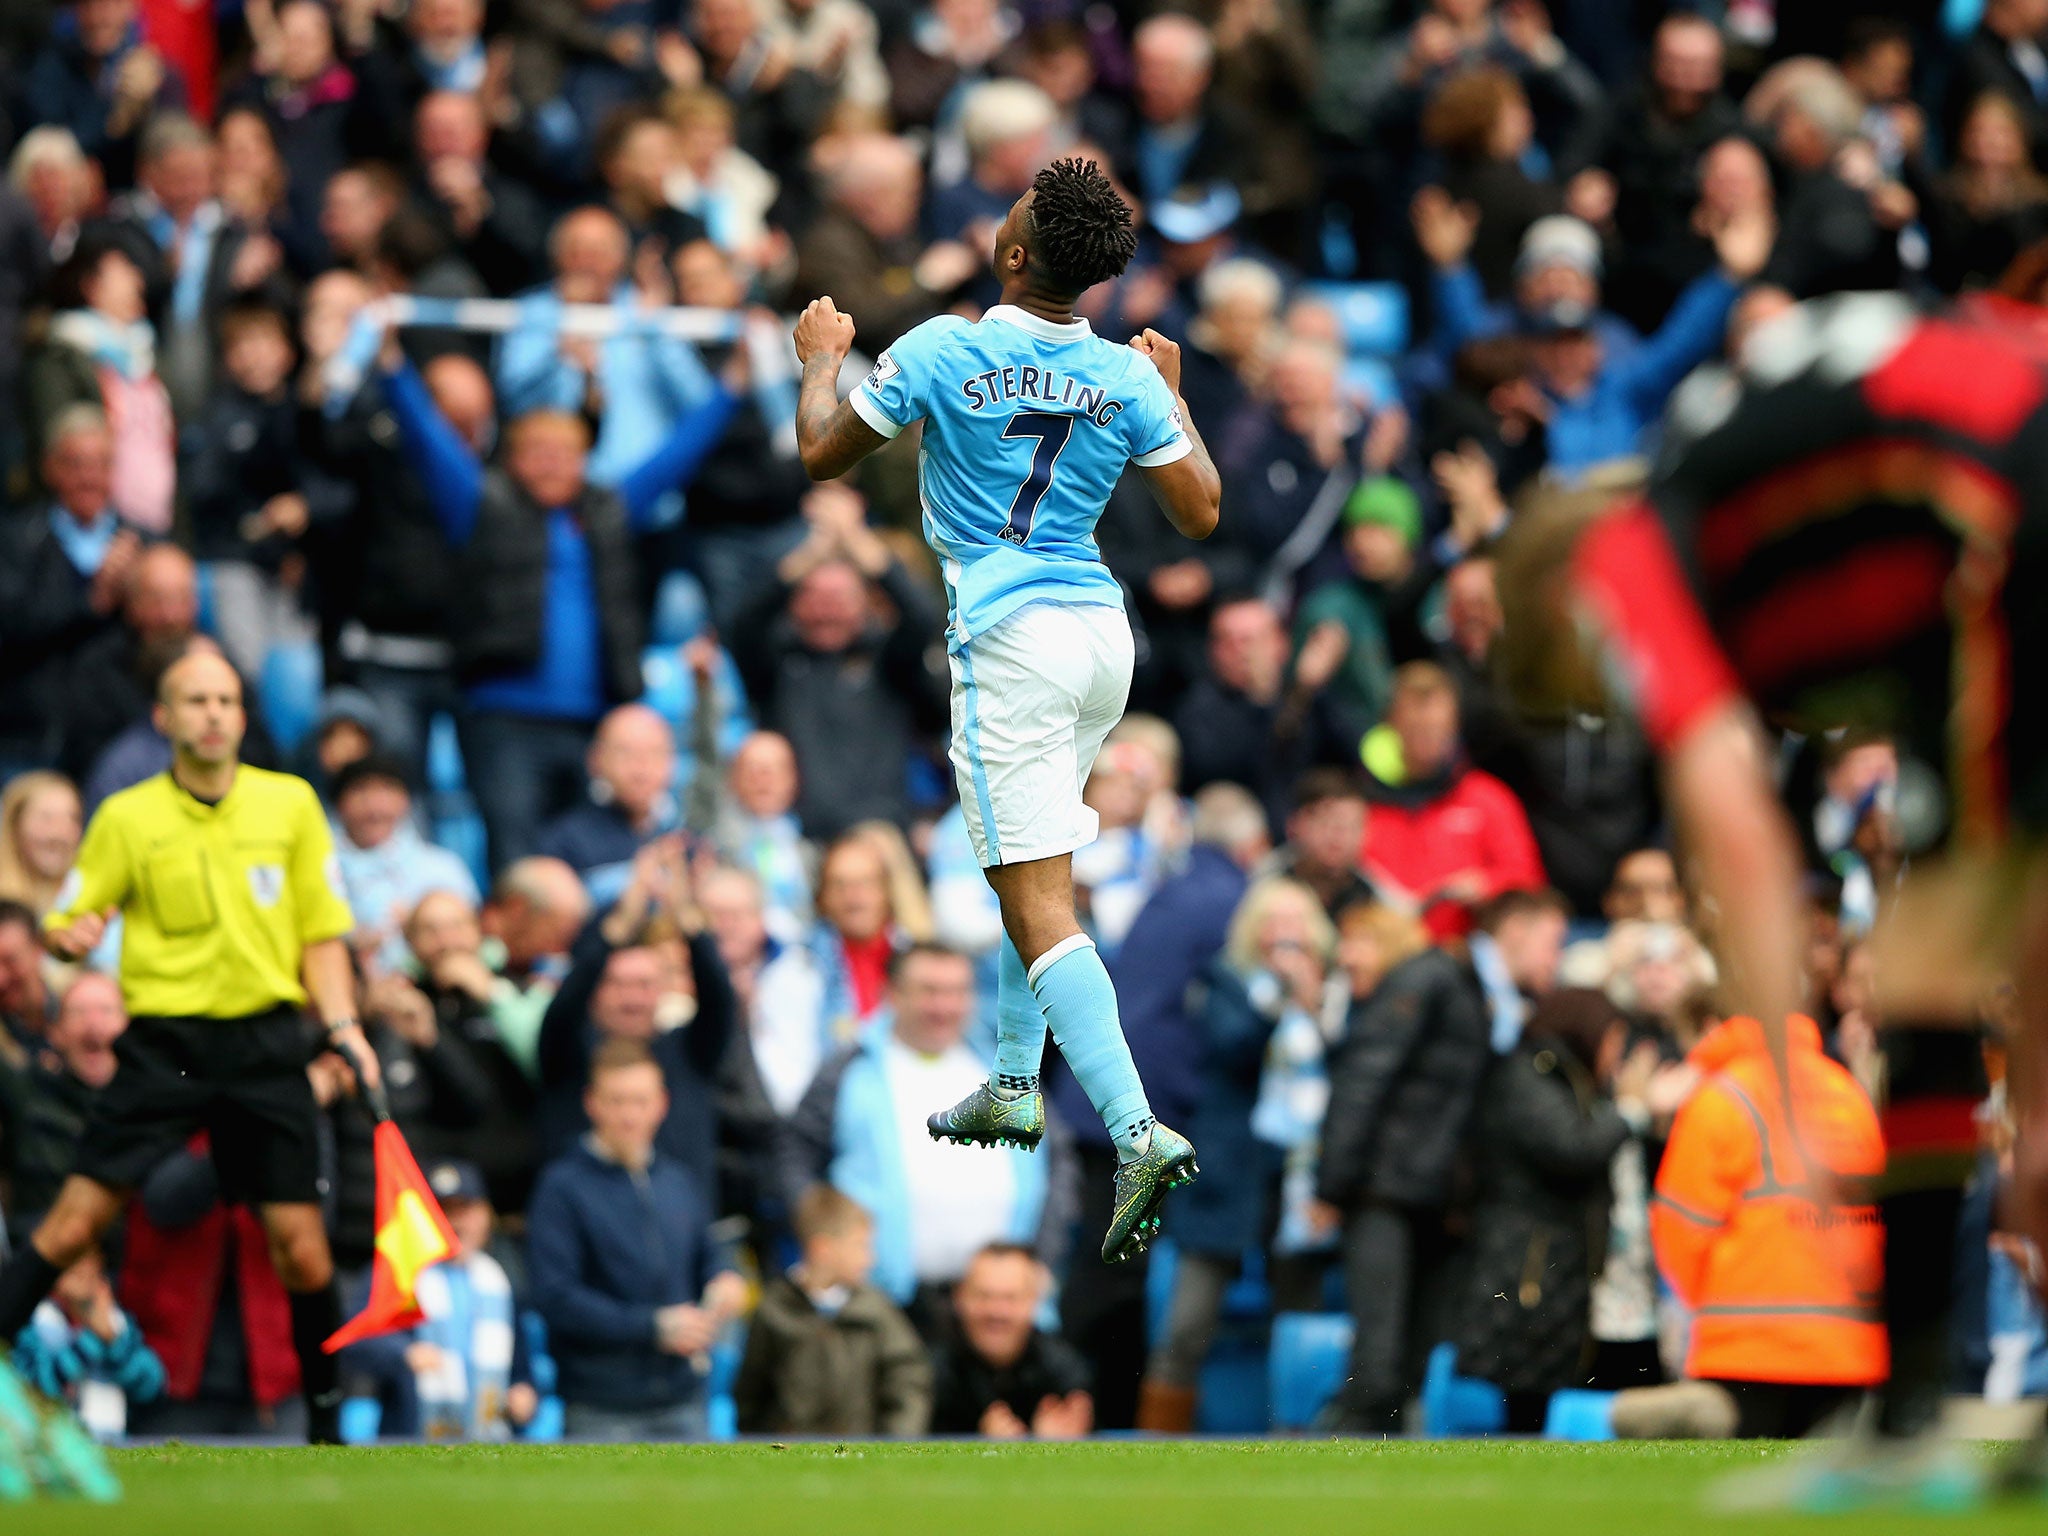 Raheem Sterling celebrates one of his goals against Bournemouth